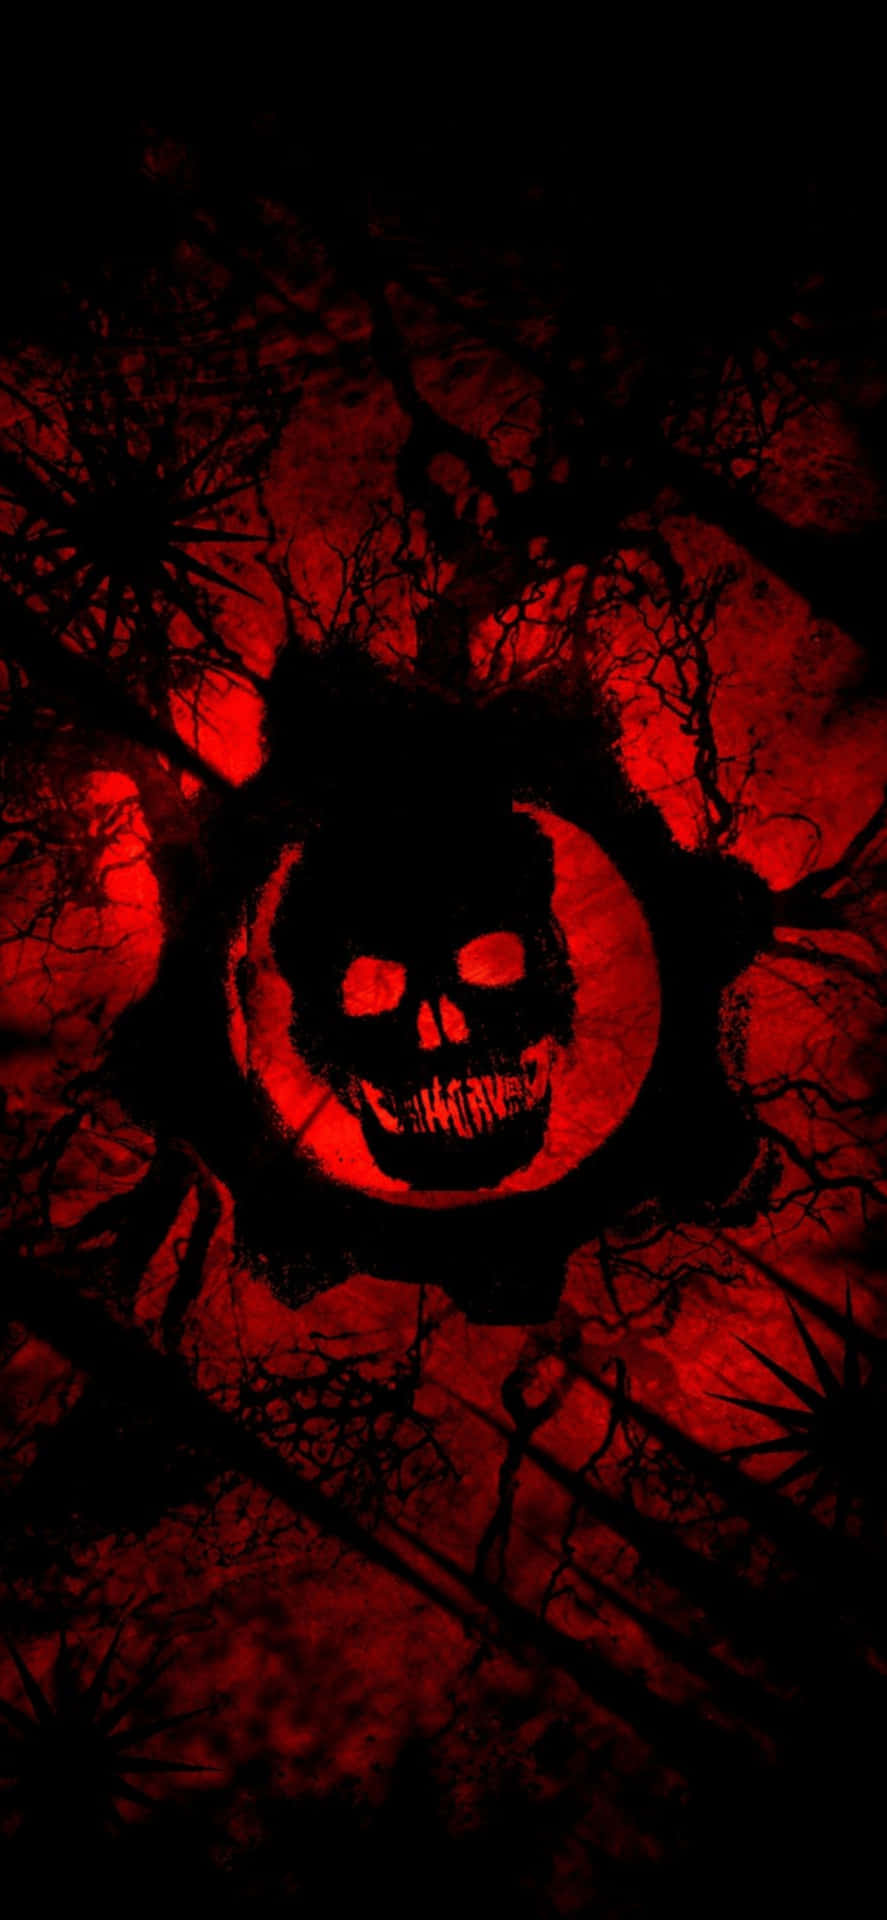 gears of war logo in red and black